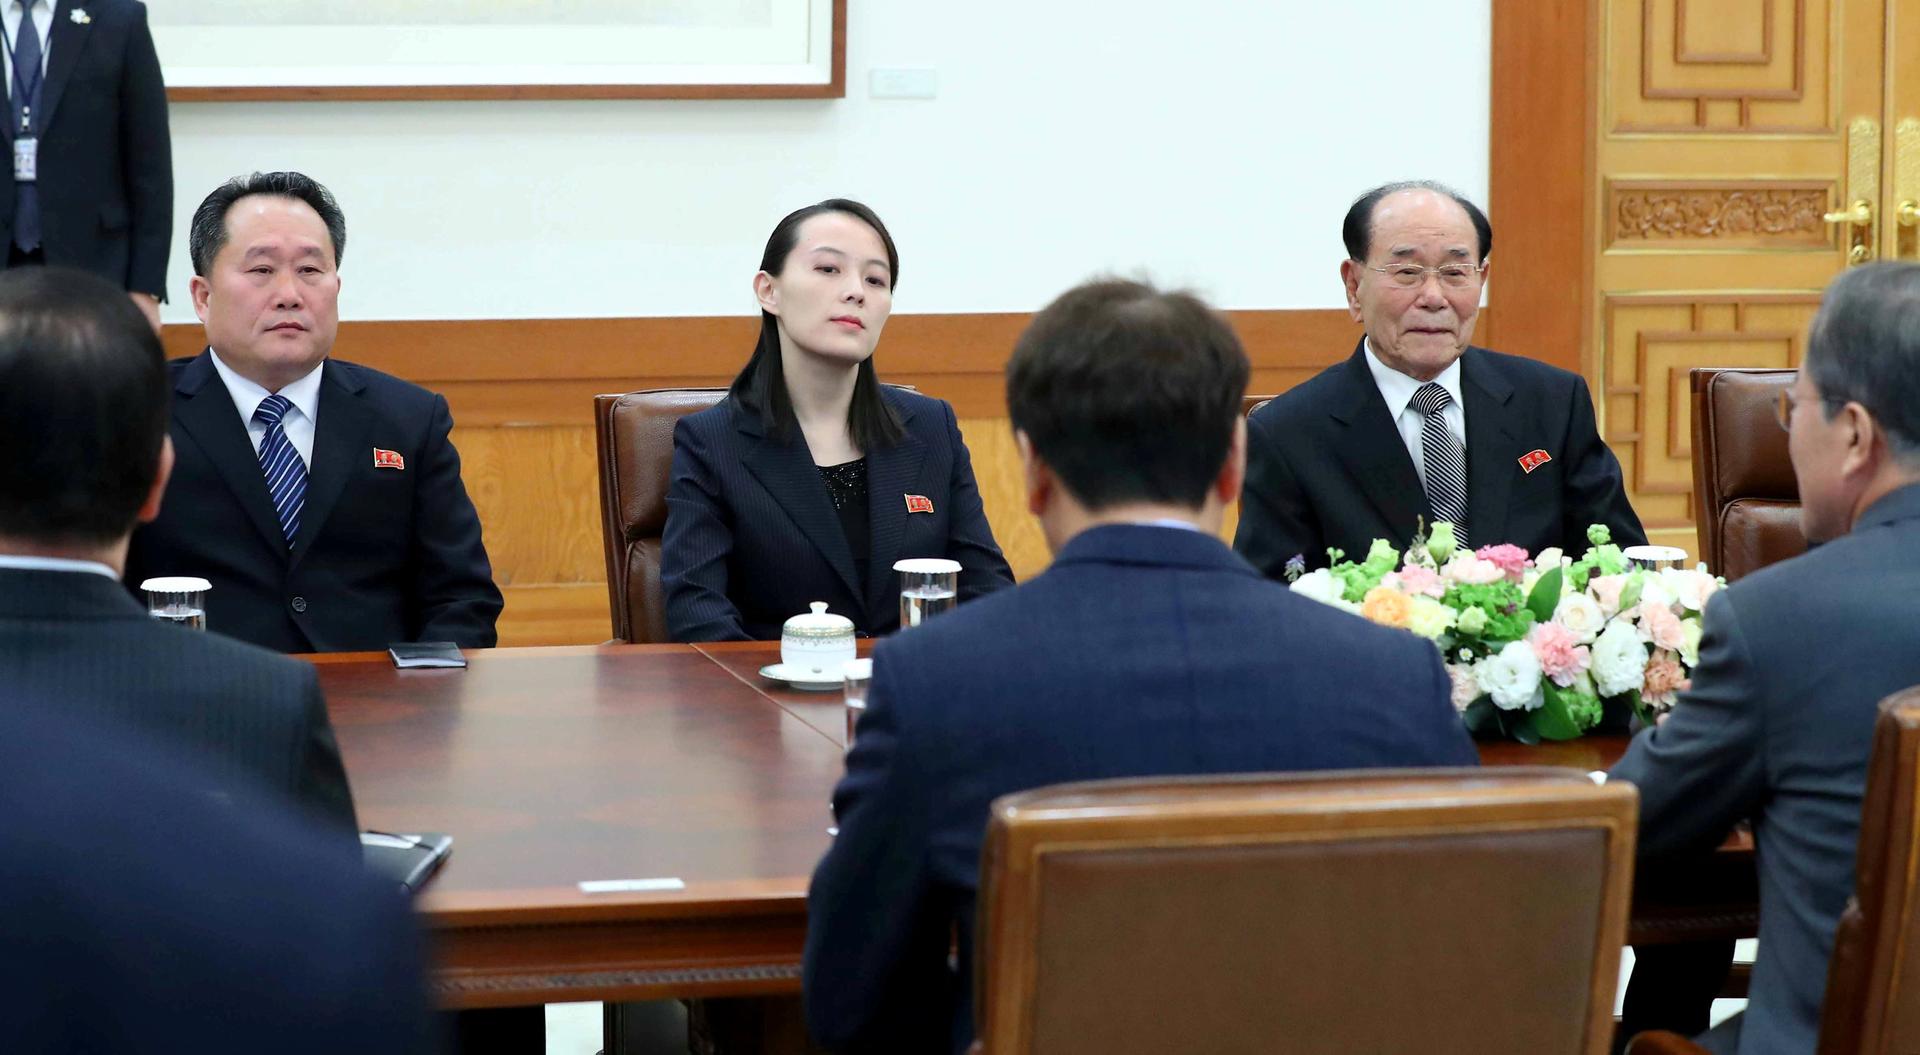 South Korean President Moon Jae-in talks with President of the Presidium of the Supreme People's Assembly of North Korea Kim Yong-nam and Kim Yo-jong, the sister of North Korea's leader Kim Jong-un.